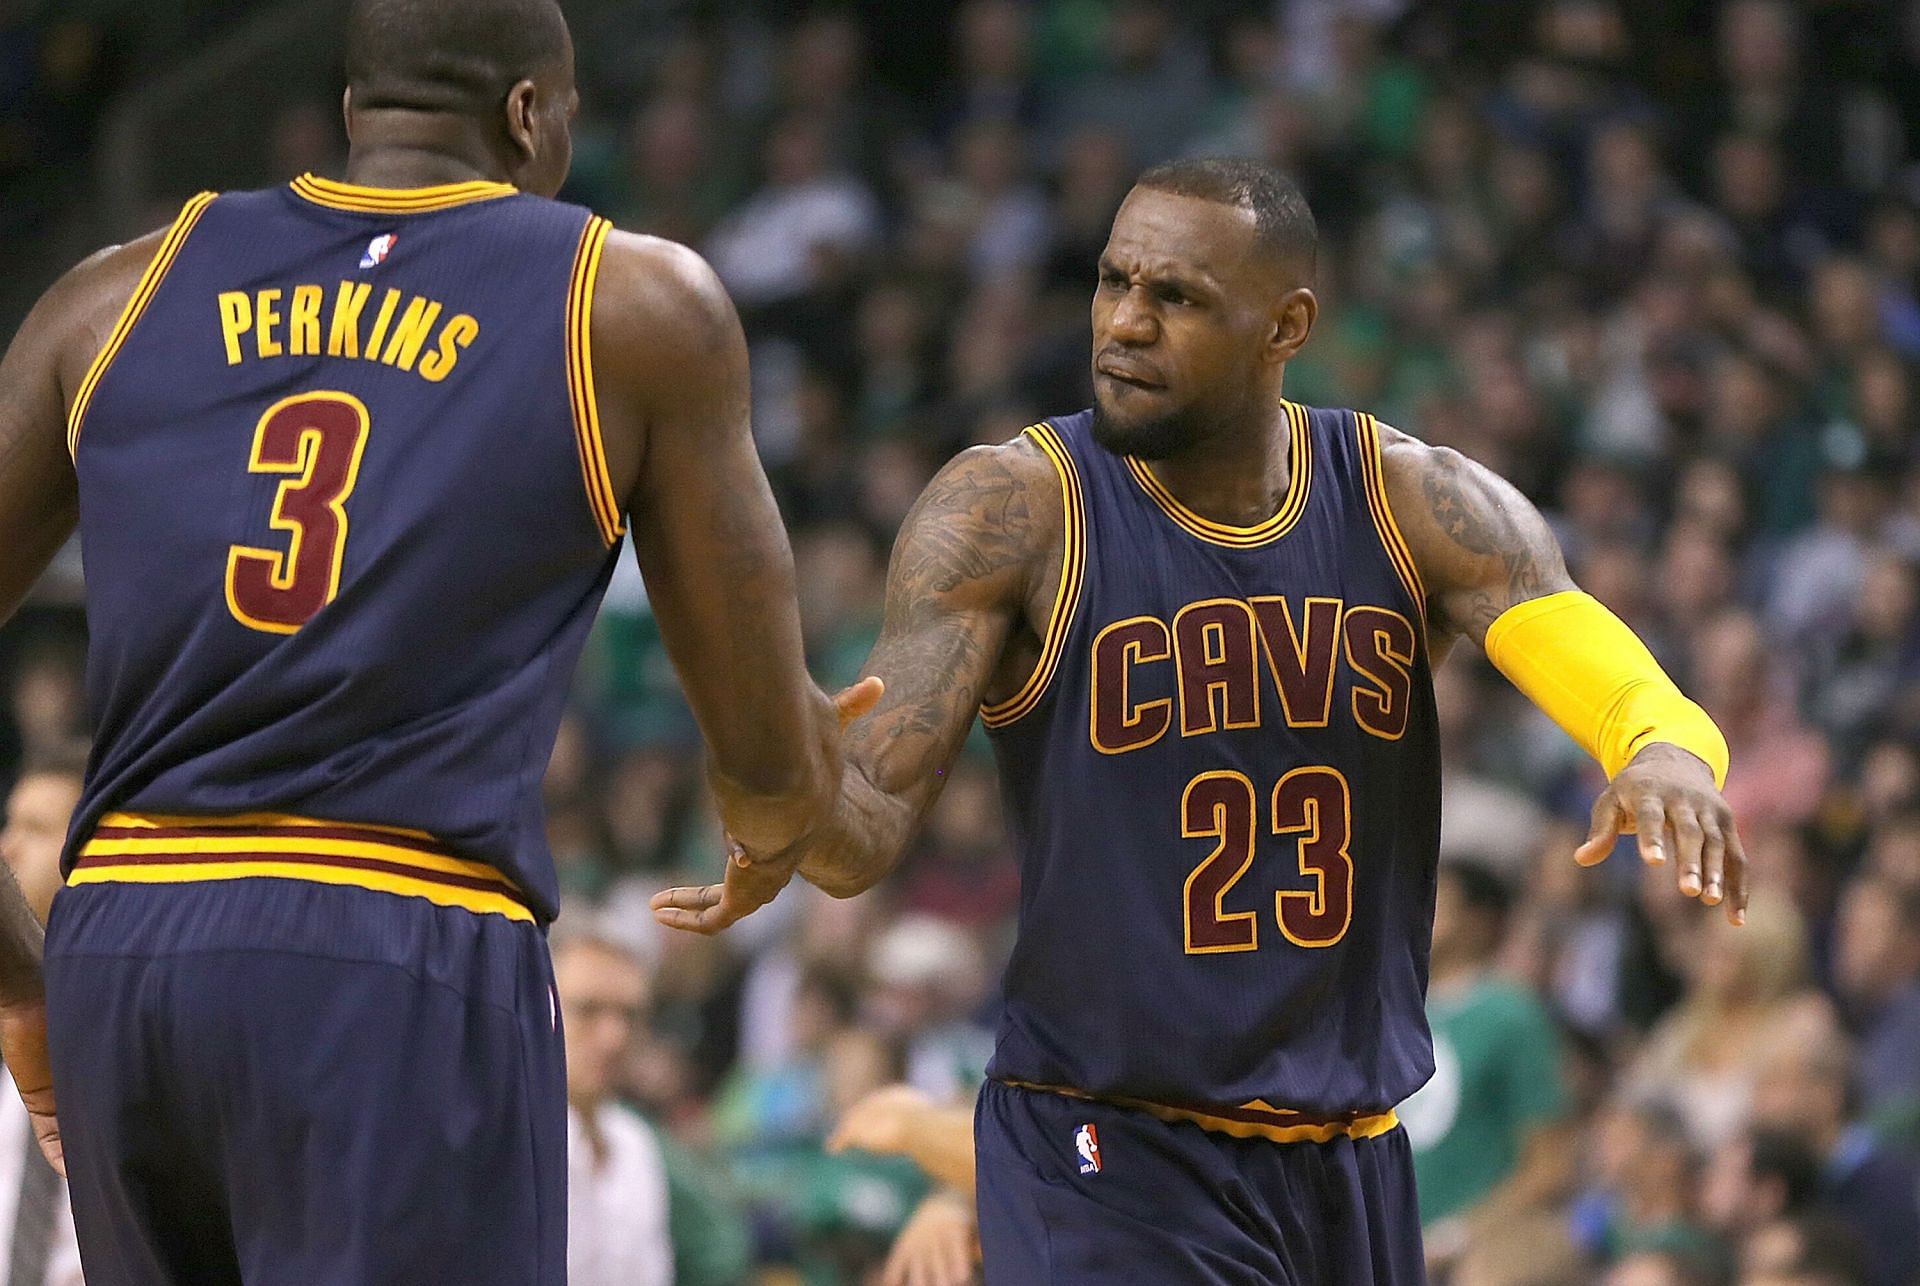 Kendrick Perkins and LeBron James playing for the Cleveland Cavaliers in 2015.